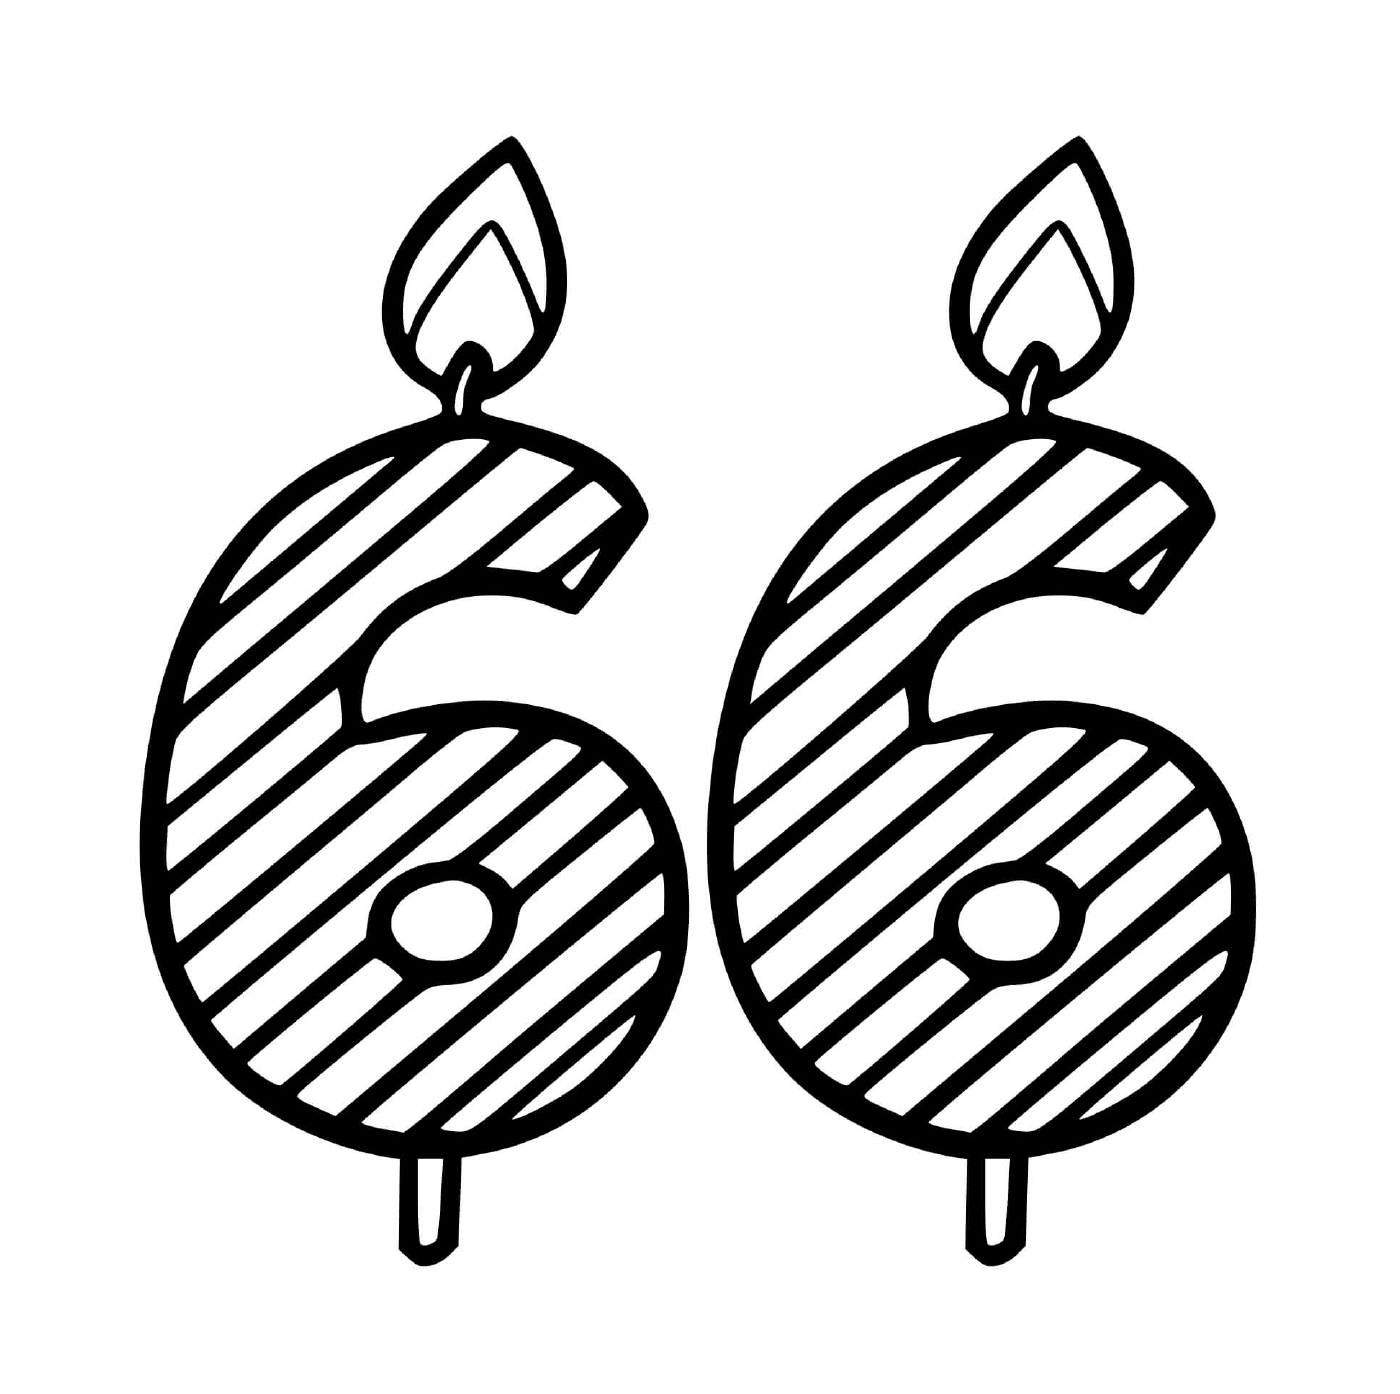  A candle representing the number six and six 